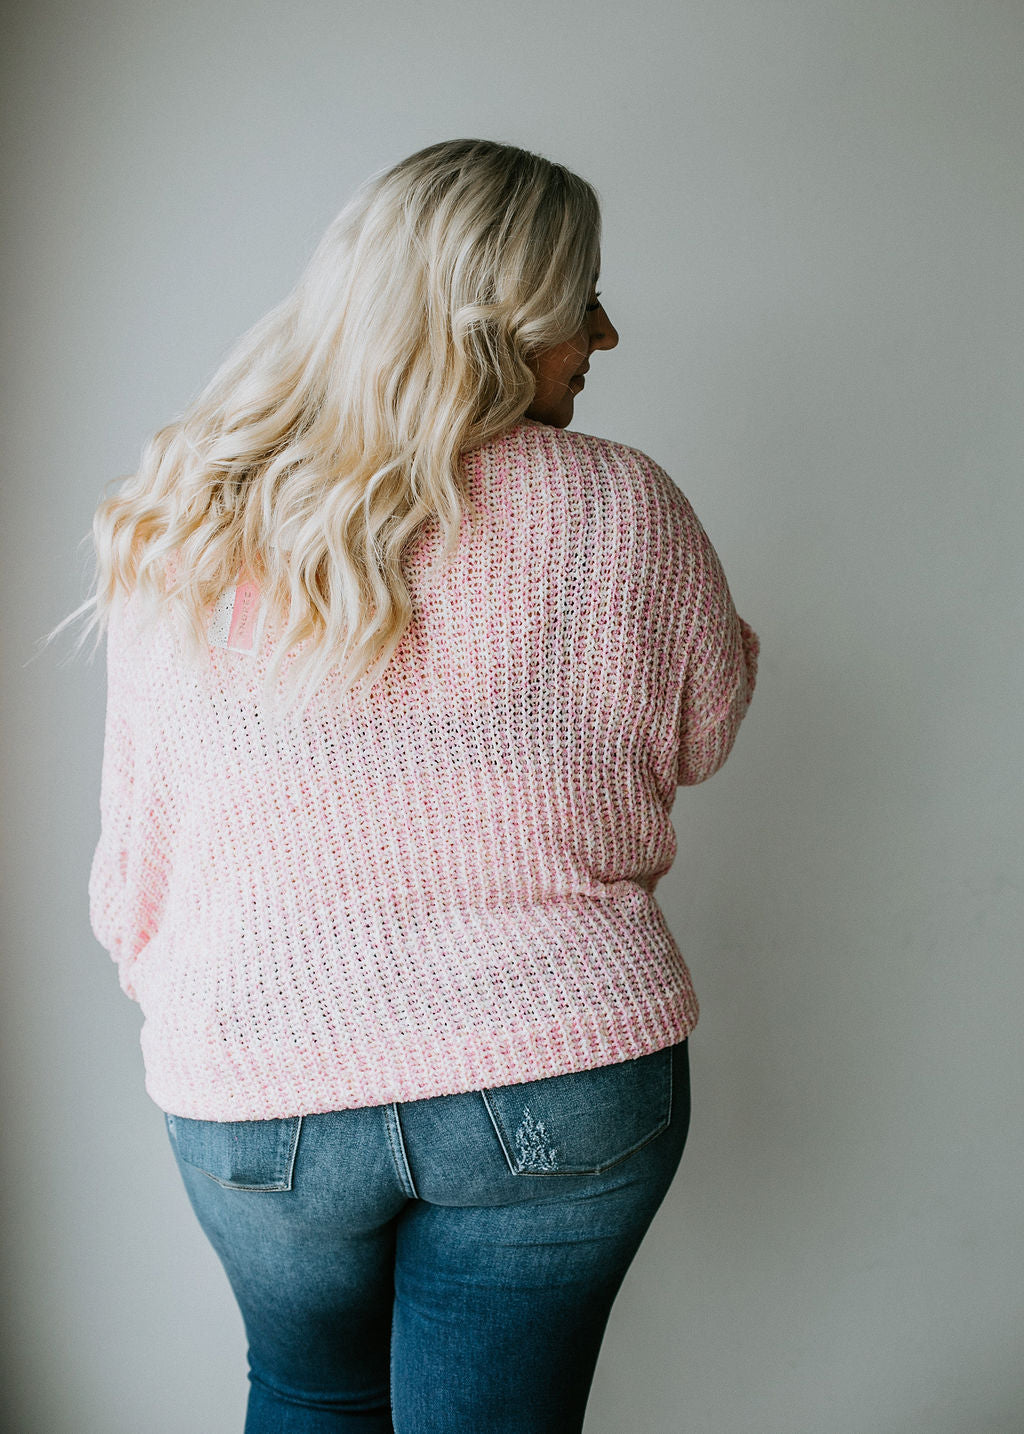 Curvy Candy Coated Sweater FINAL SALE